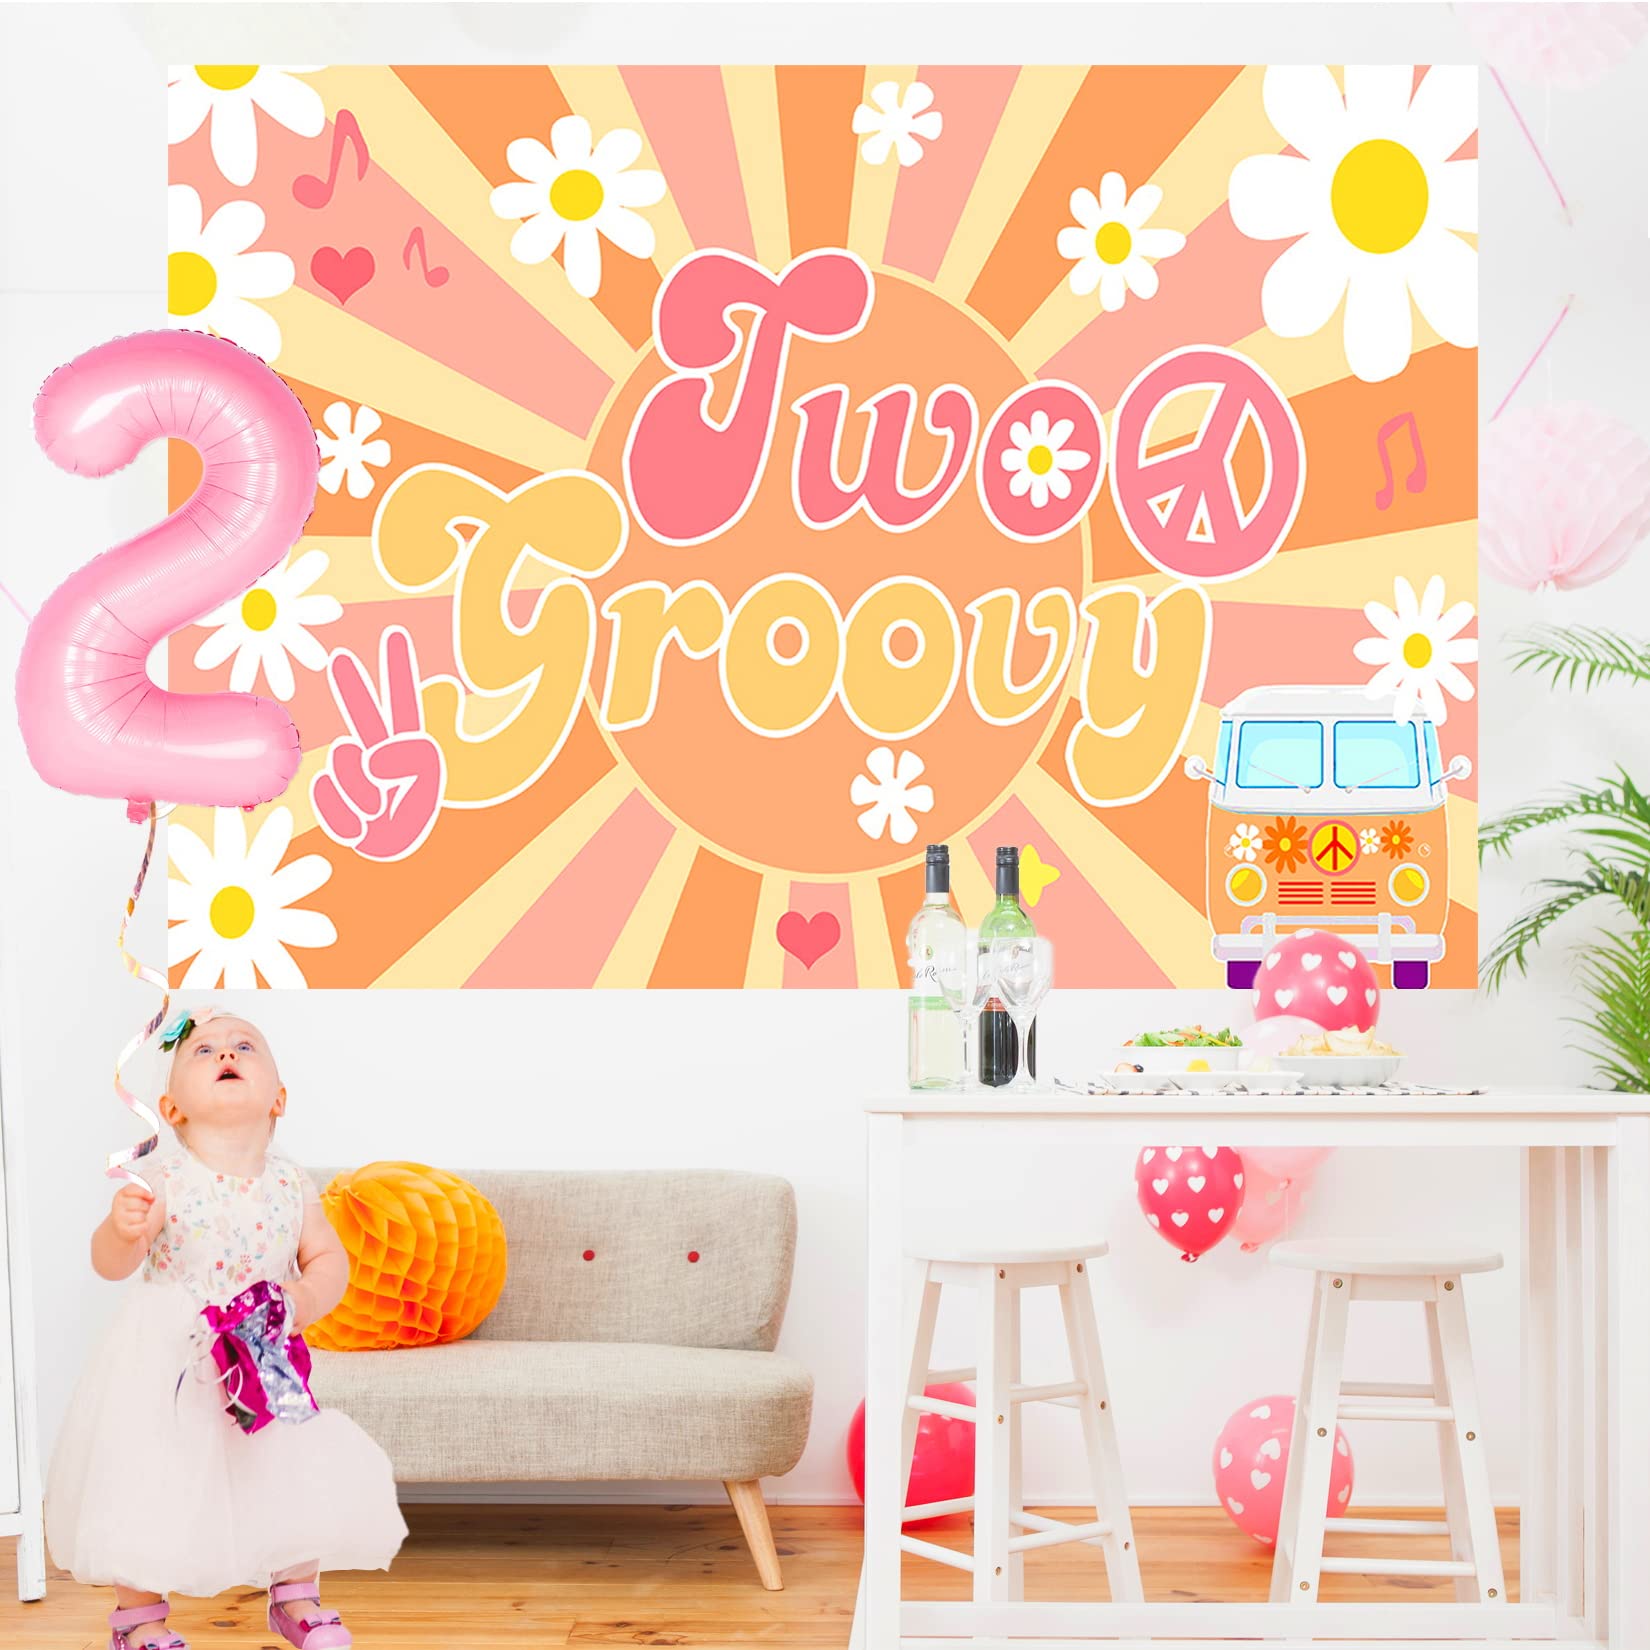 Two Groovy Party Decorations, Two Groovy Birthday Decorations, Groovy Balloon Arch, Backdrop, Two Groovy Cake Topper for Hippie Second Birthday Party Decorations, Girl’s 2nd Birthday